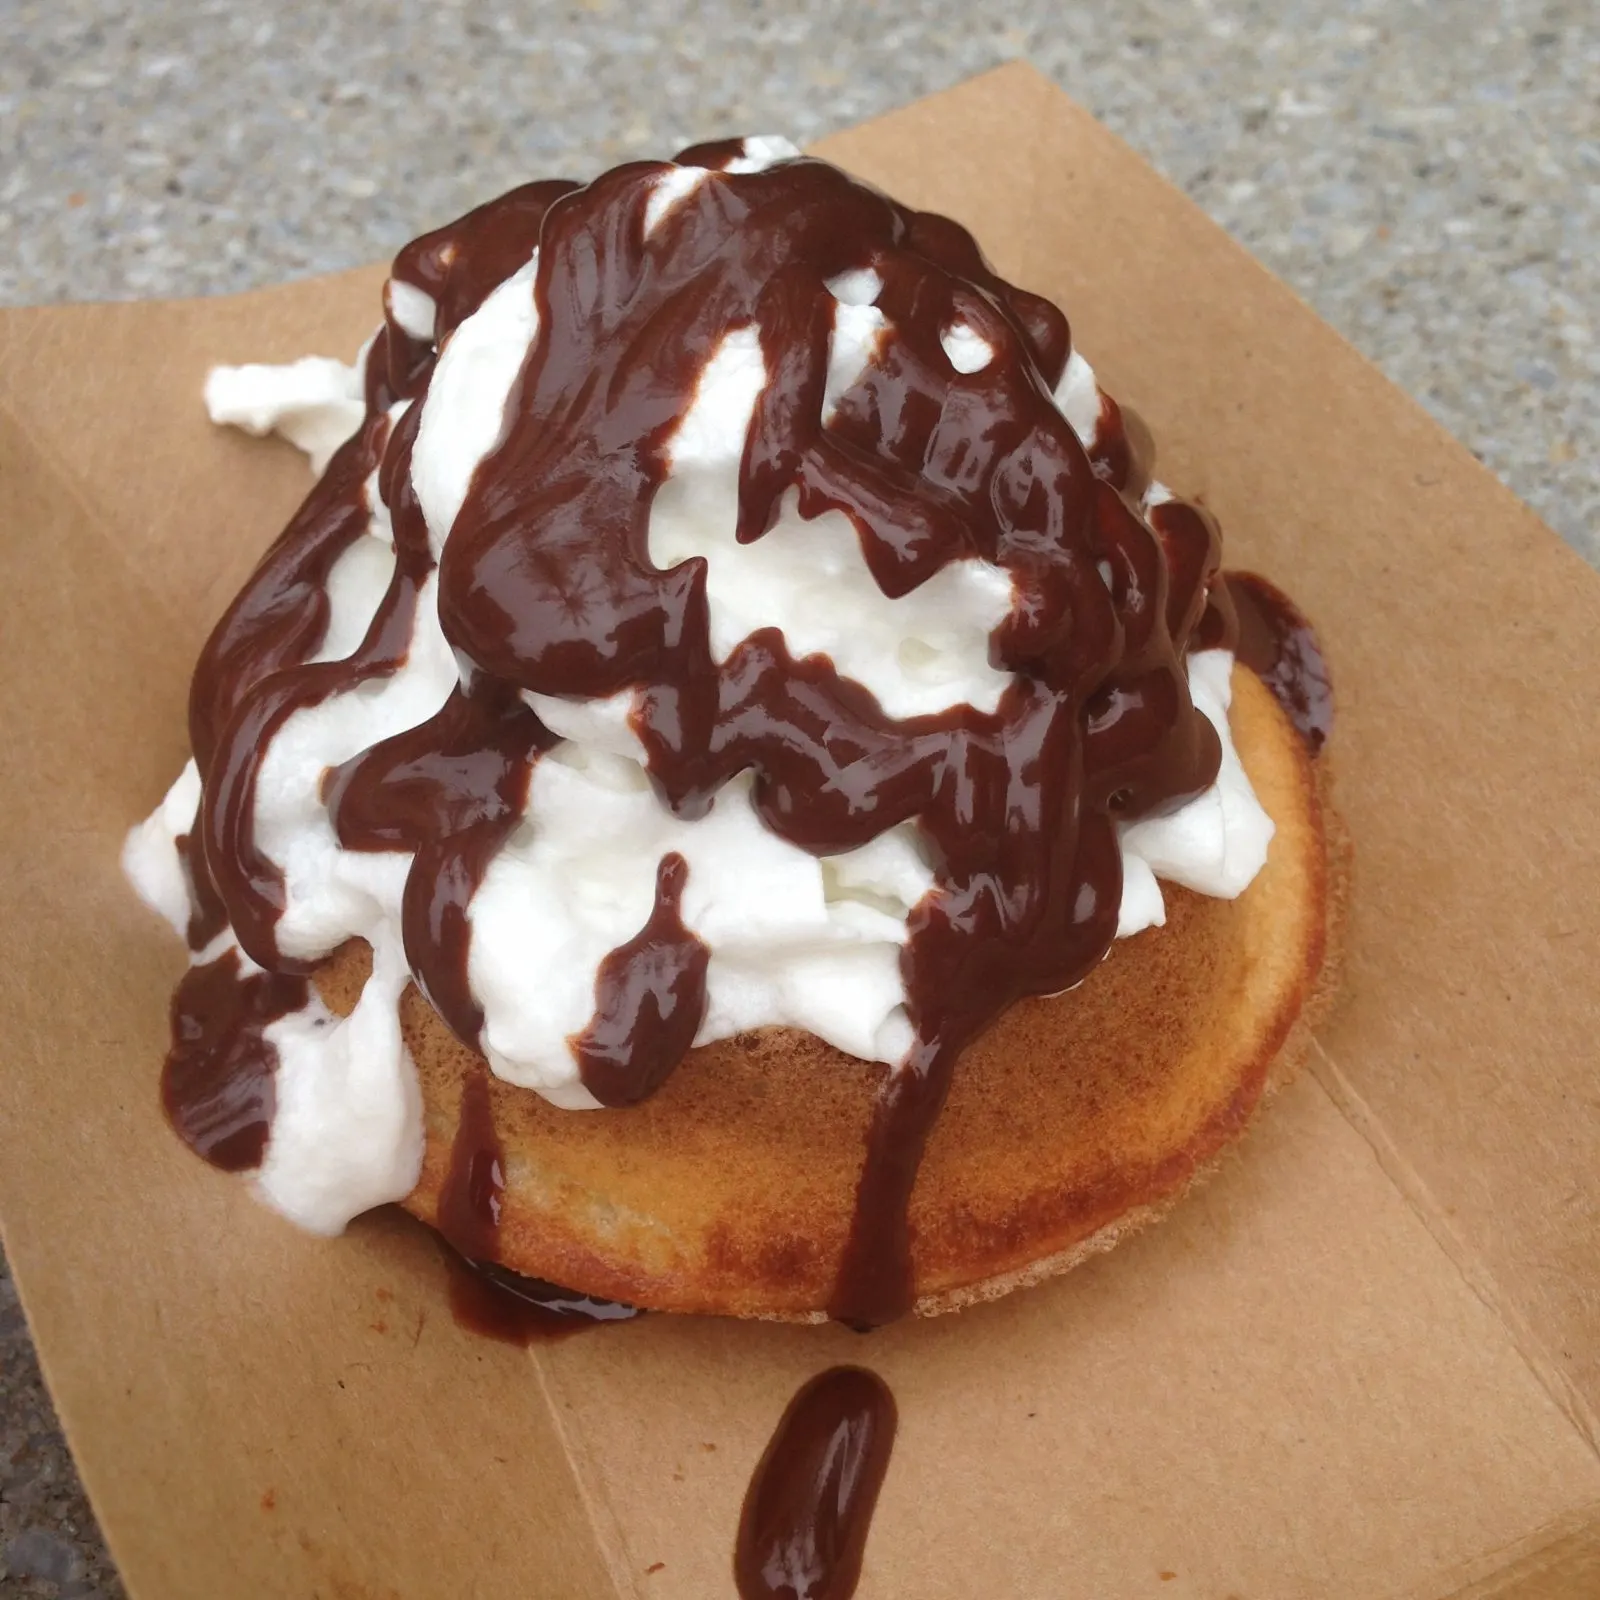 Belgian waffle covered in whipped cream and chocolate from epcot food and wine festival